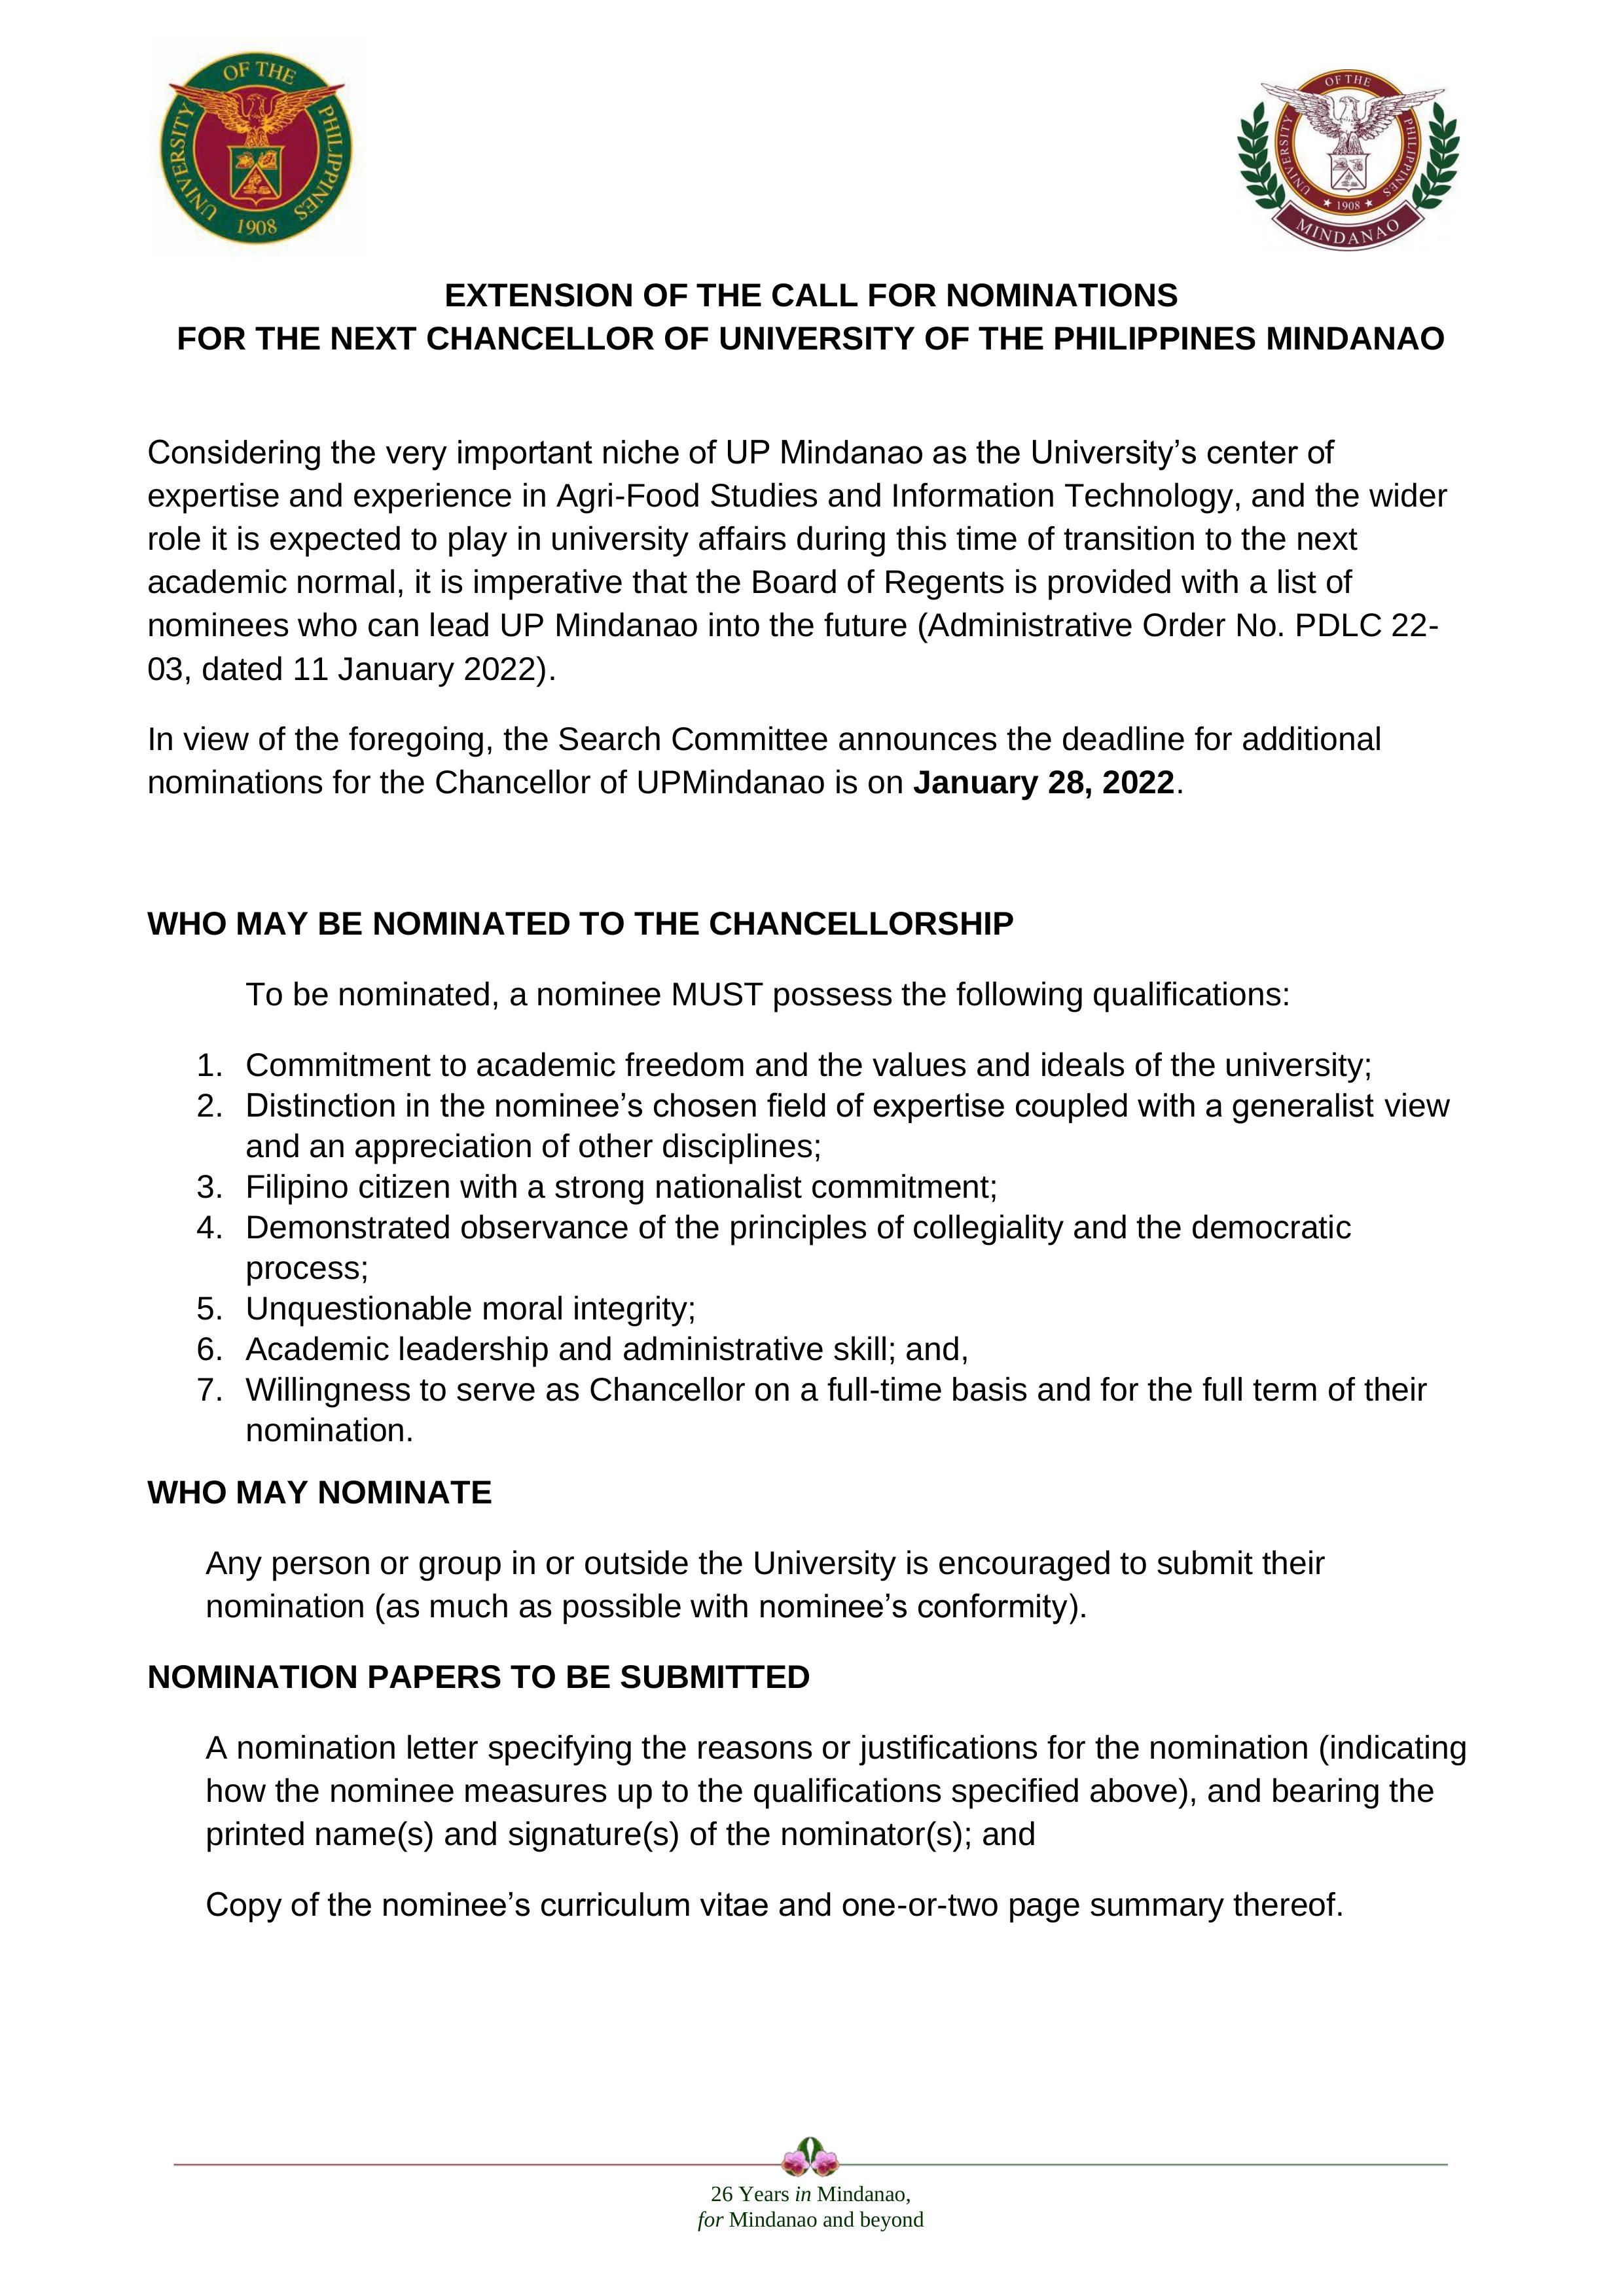 Extension of search for chancellorship UPMin until 28Jan2022-1